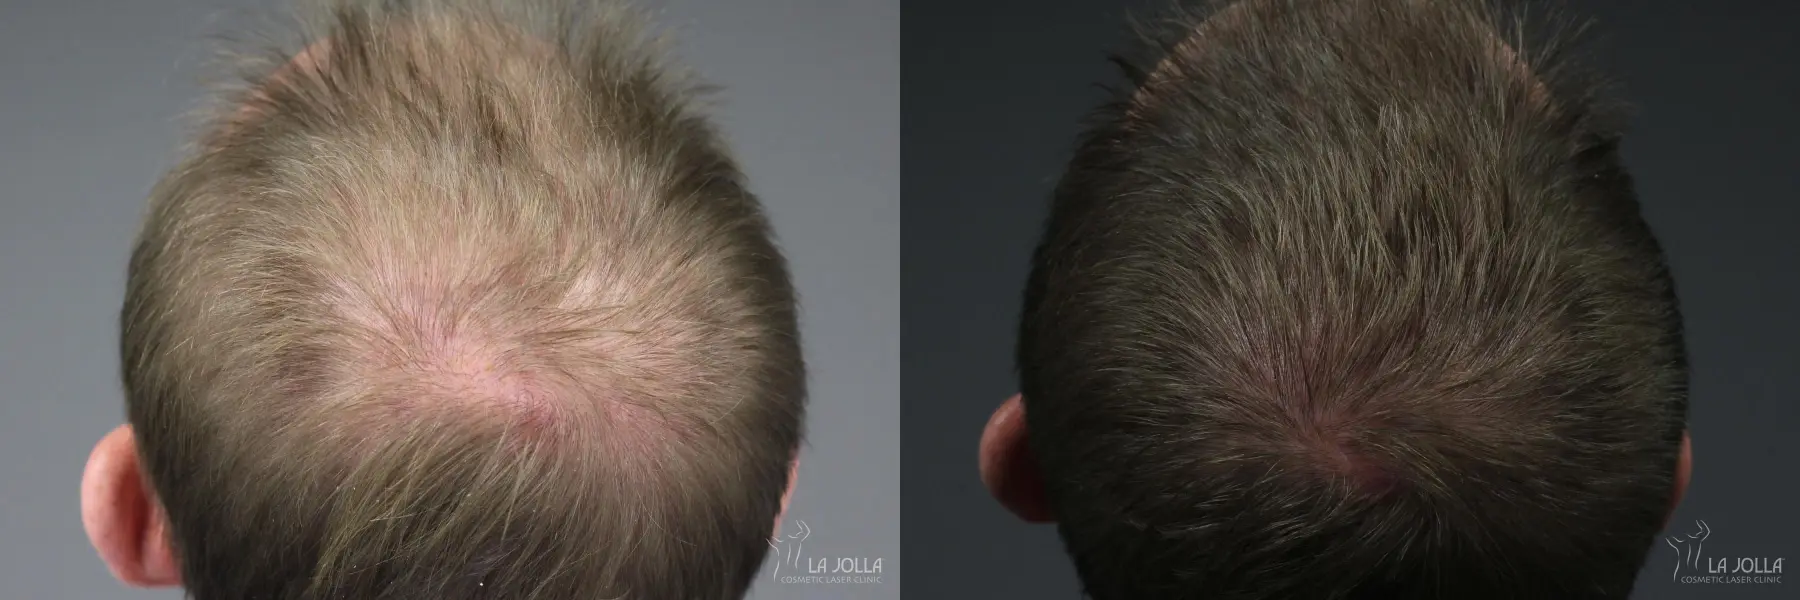 PRP (Platelet-Rich Plasma): Patient 4 - Before and After 2